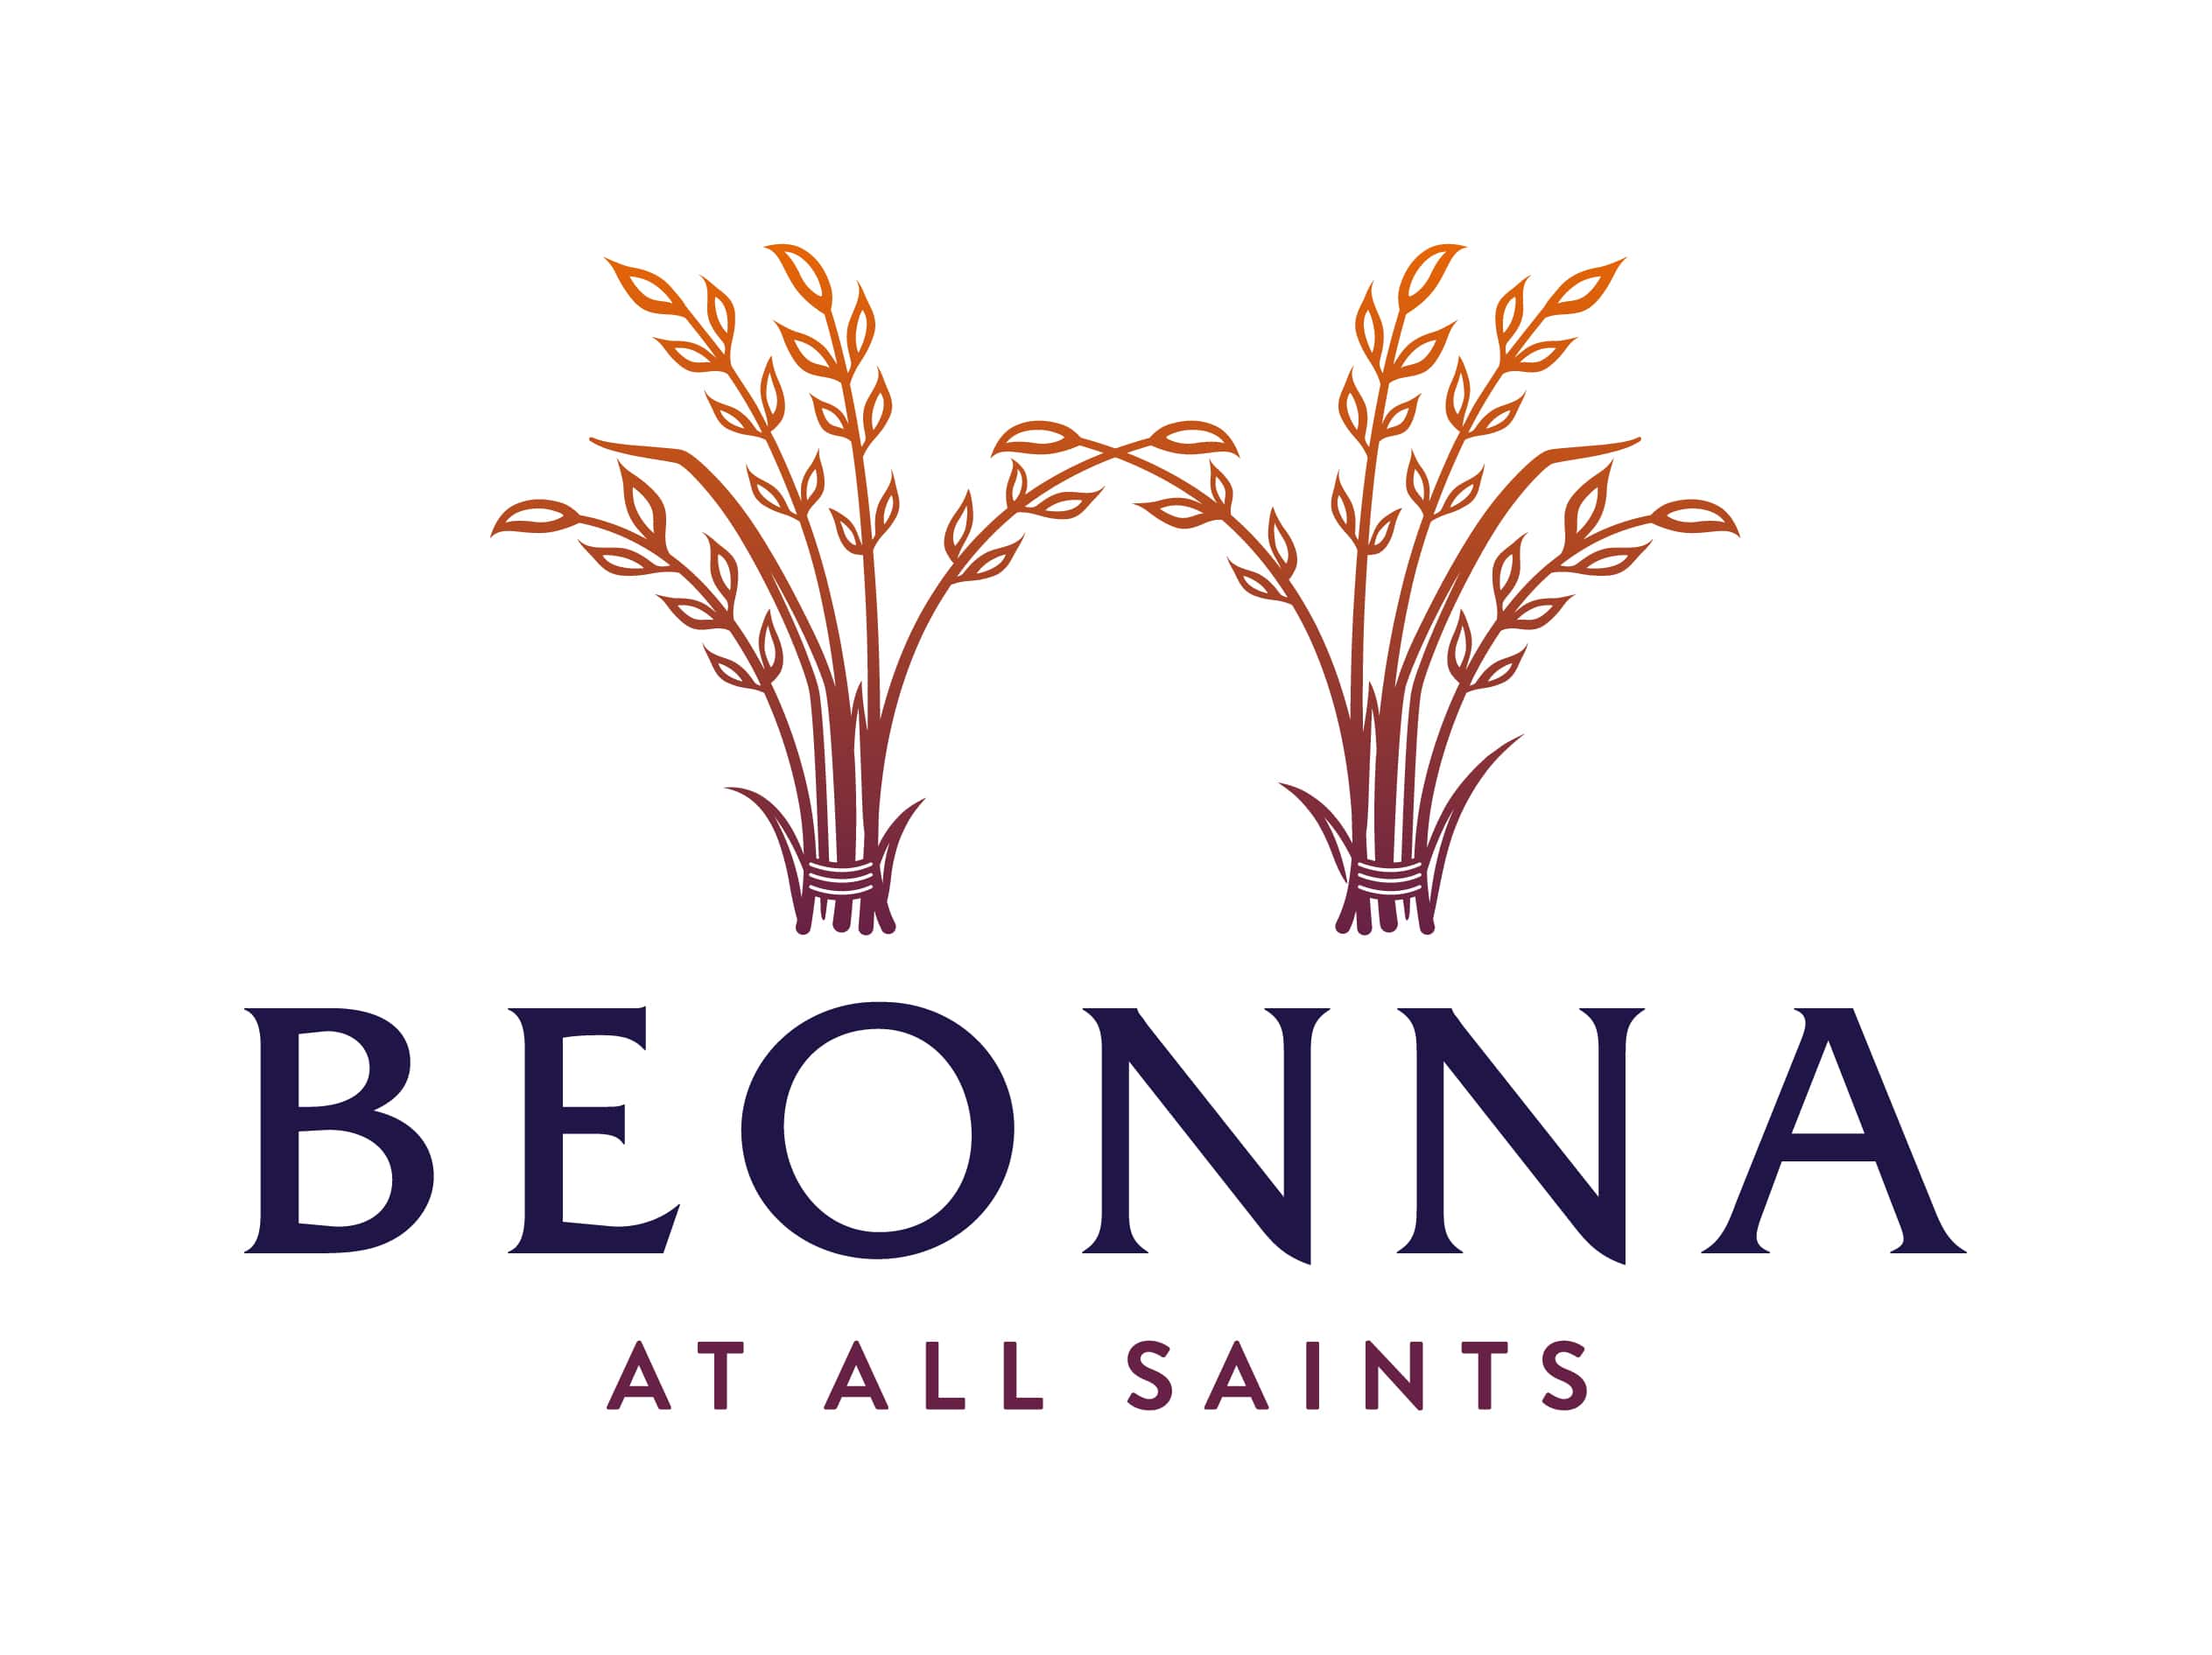 The Beonna at All Saints